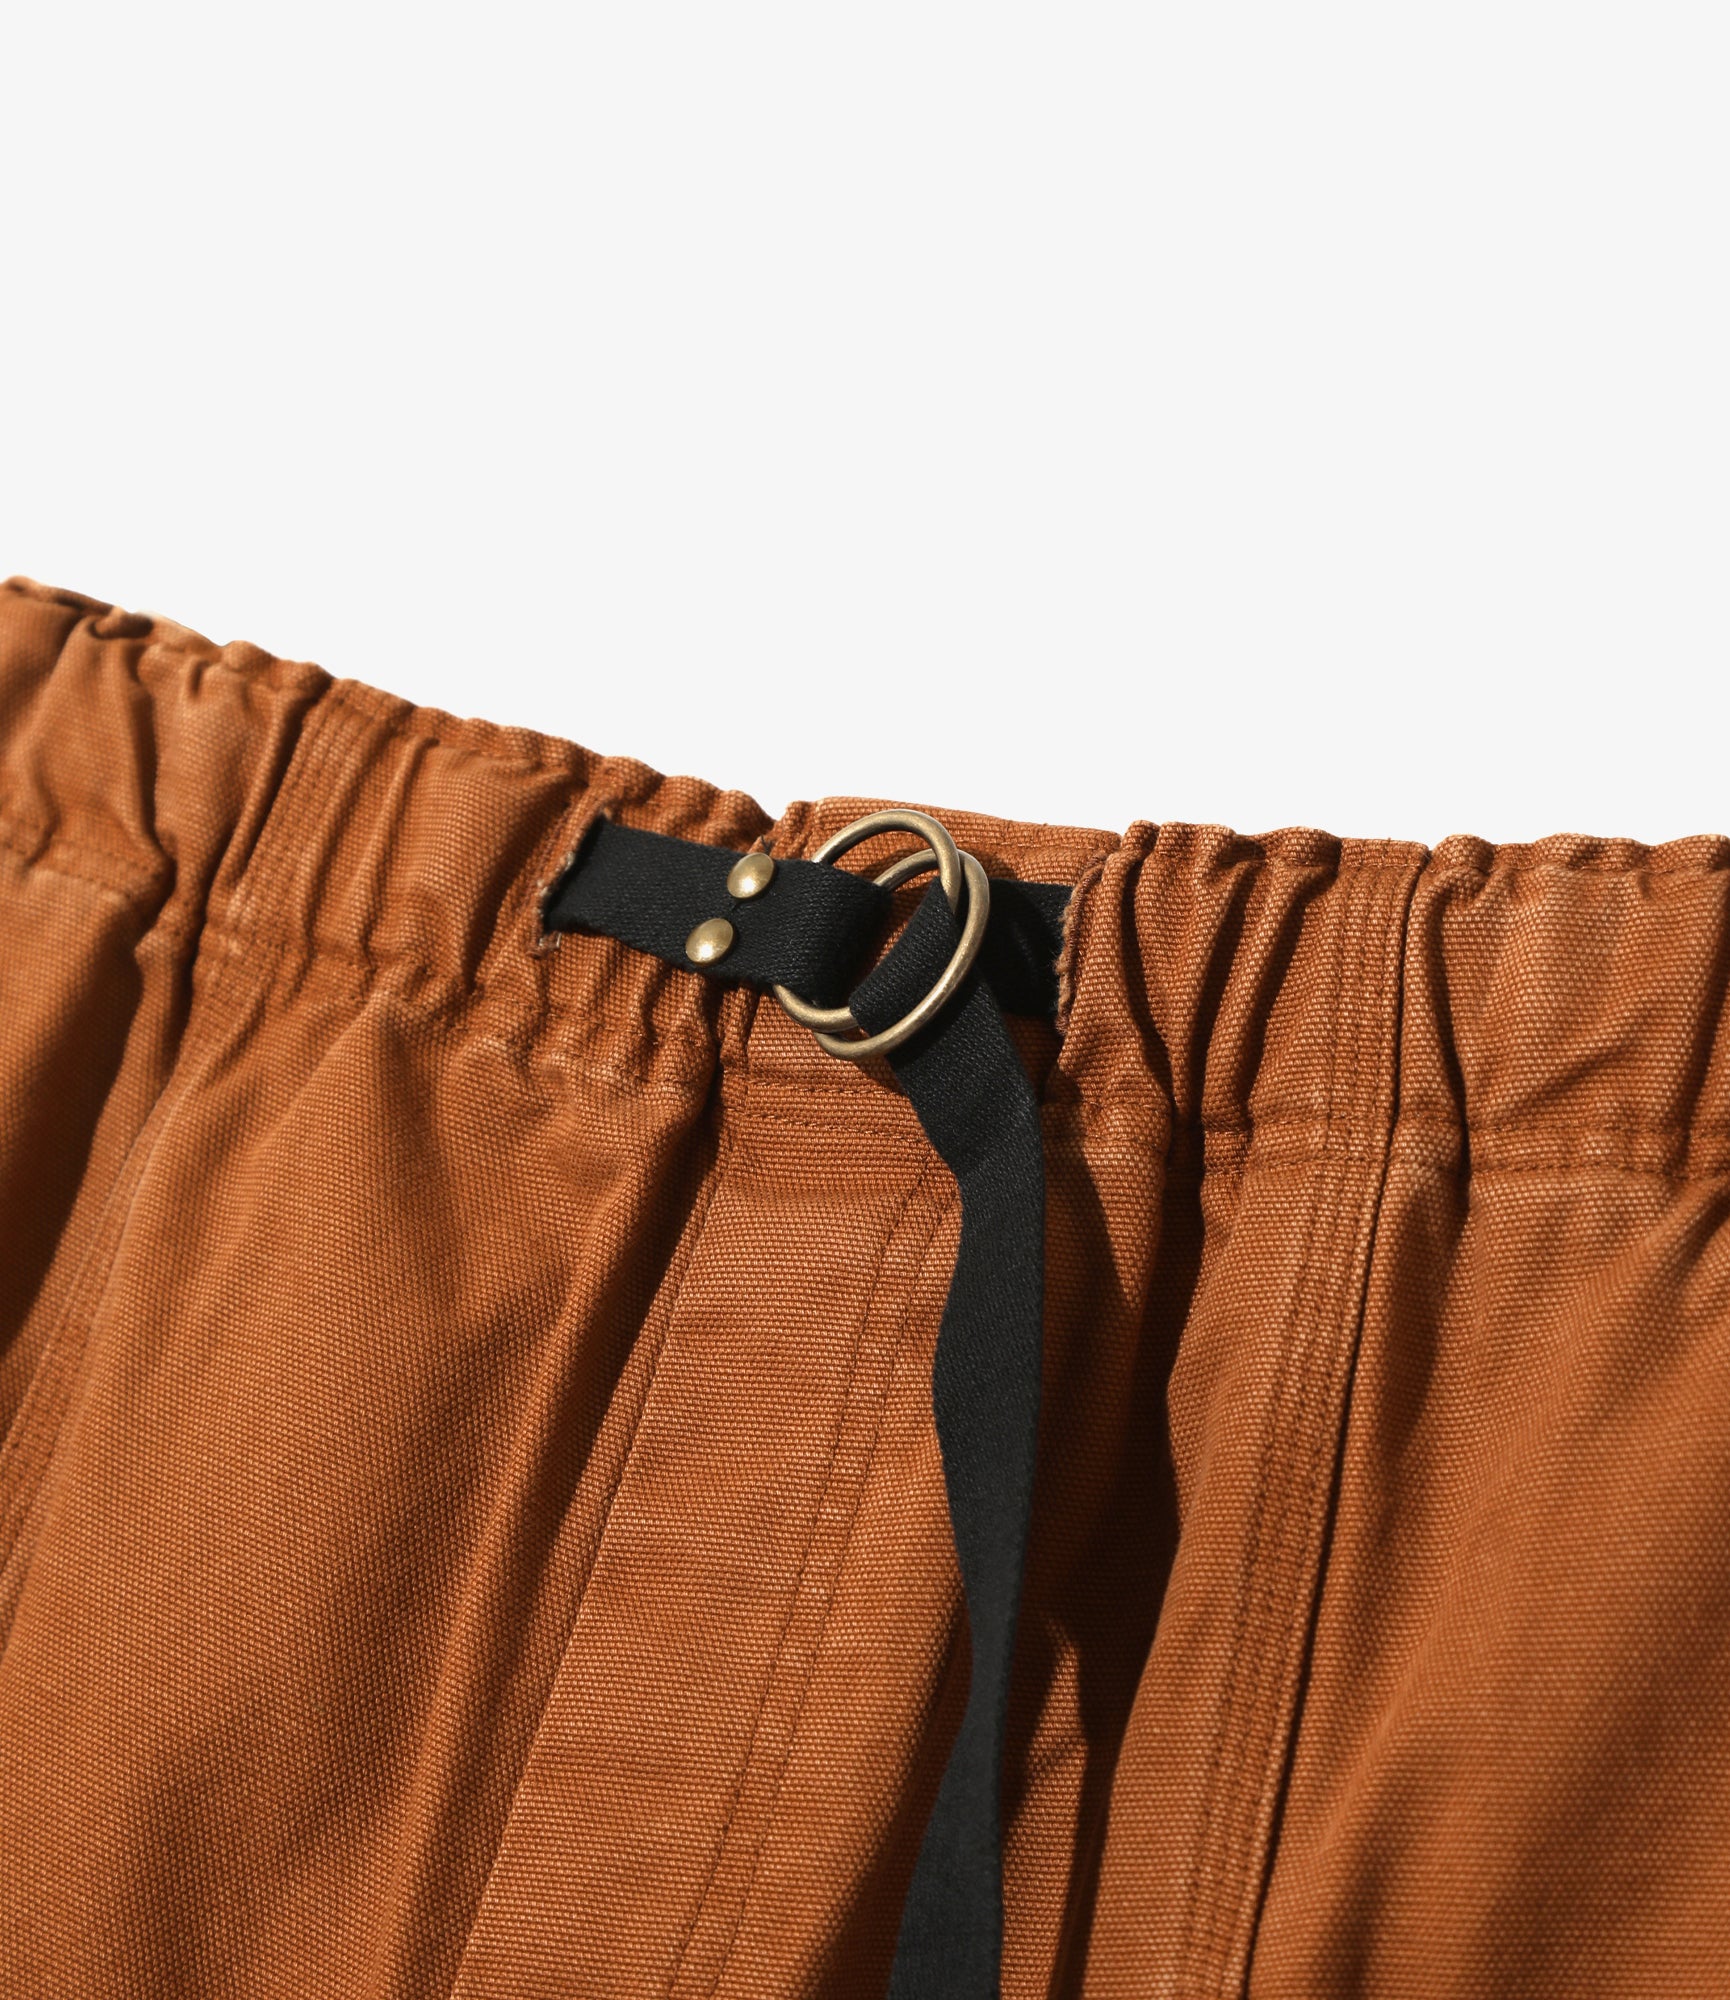 South2 West8 Belted C.S. Pant - 11.5oz Cotton Canvas - Brown